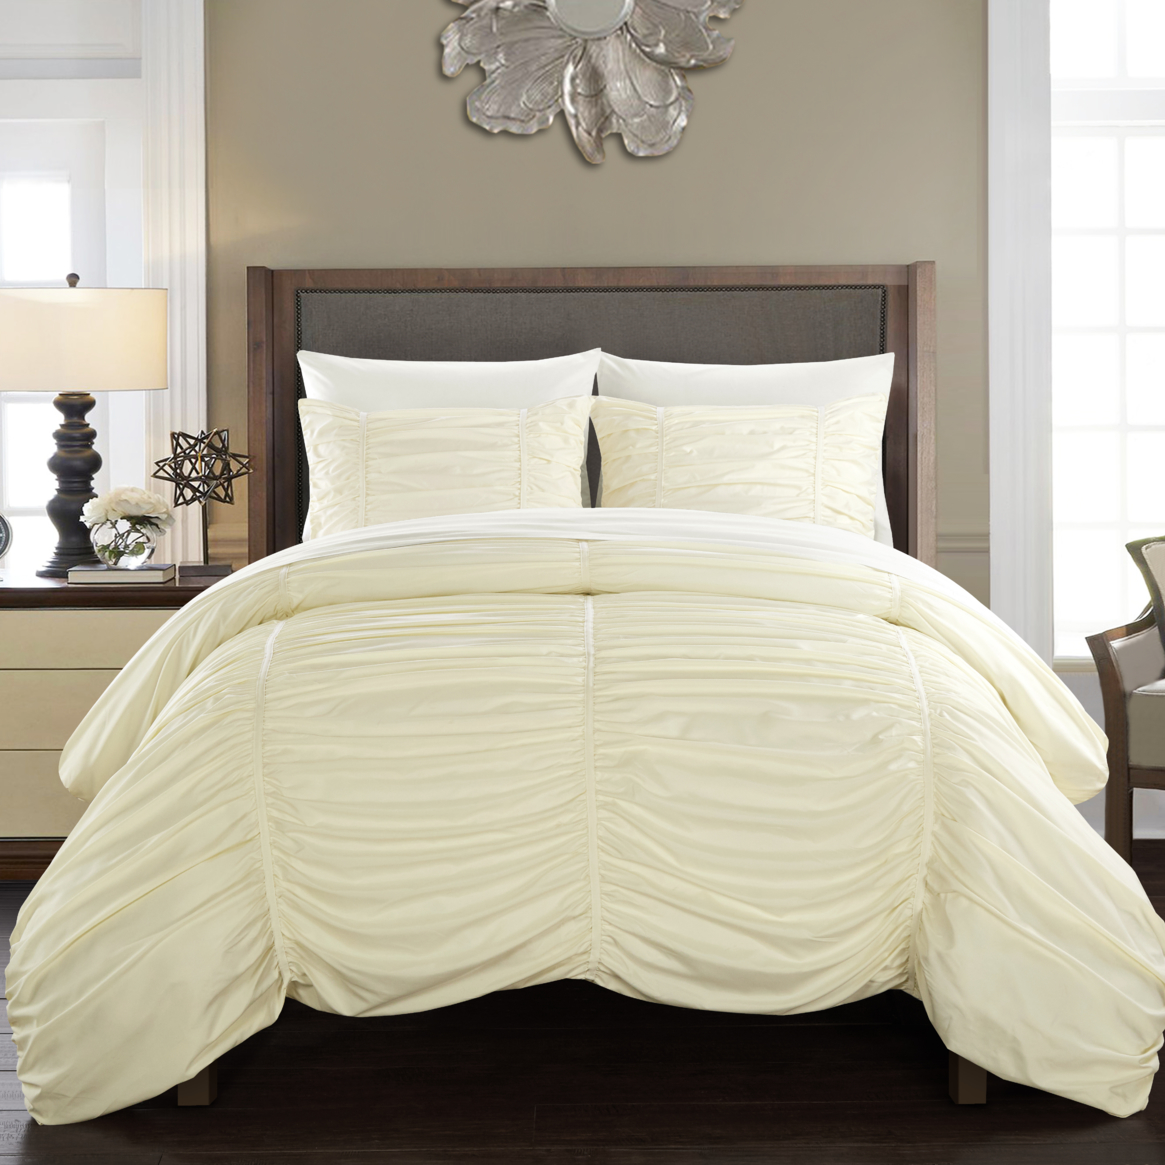 Kleia 7 Or 5 Piece Comforter Set Contemporary Striped Ruched Ruffled Design Bed In A Bag - White, Twin